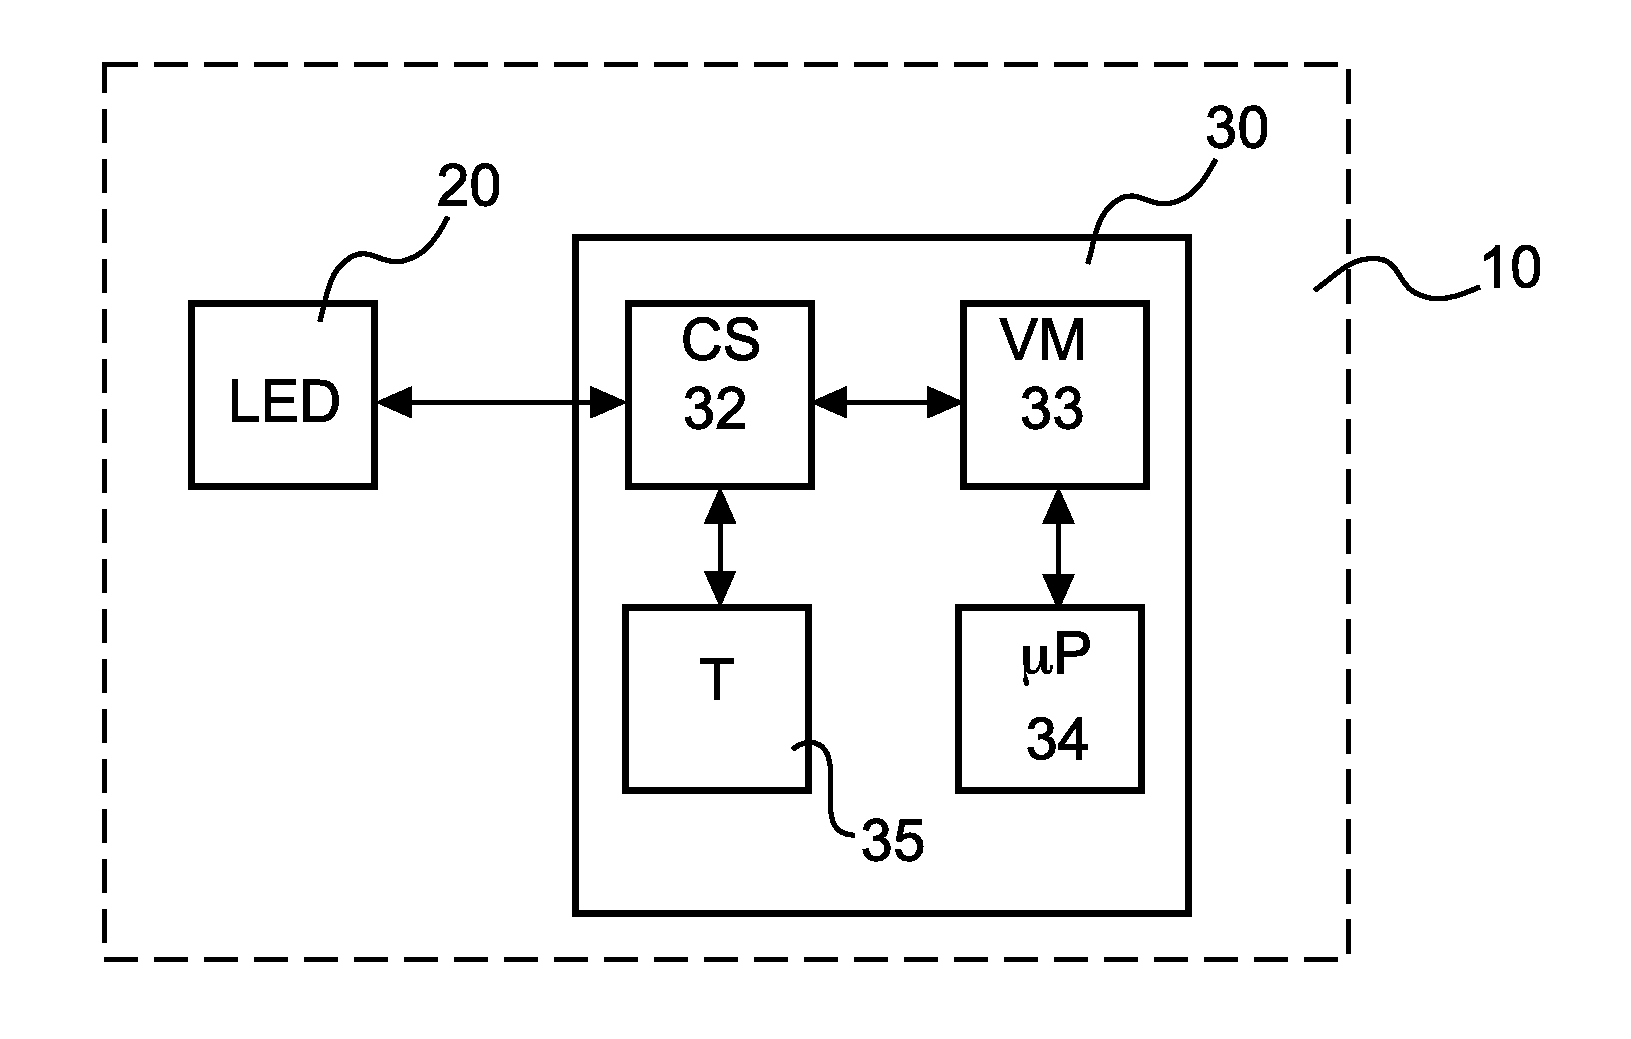 Self-calibration circuit and method for junction temperature estimation